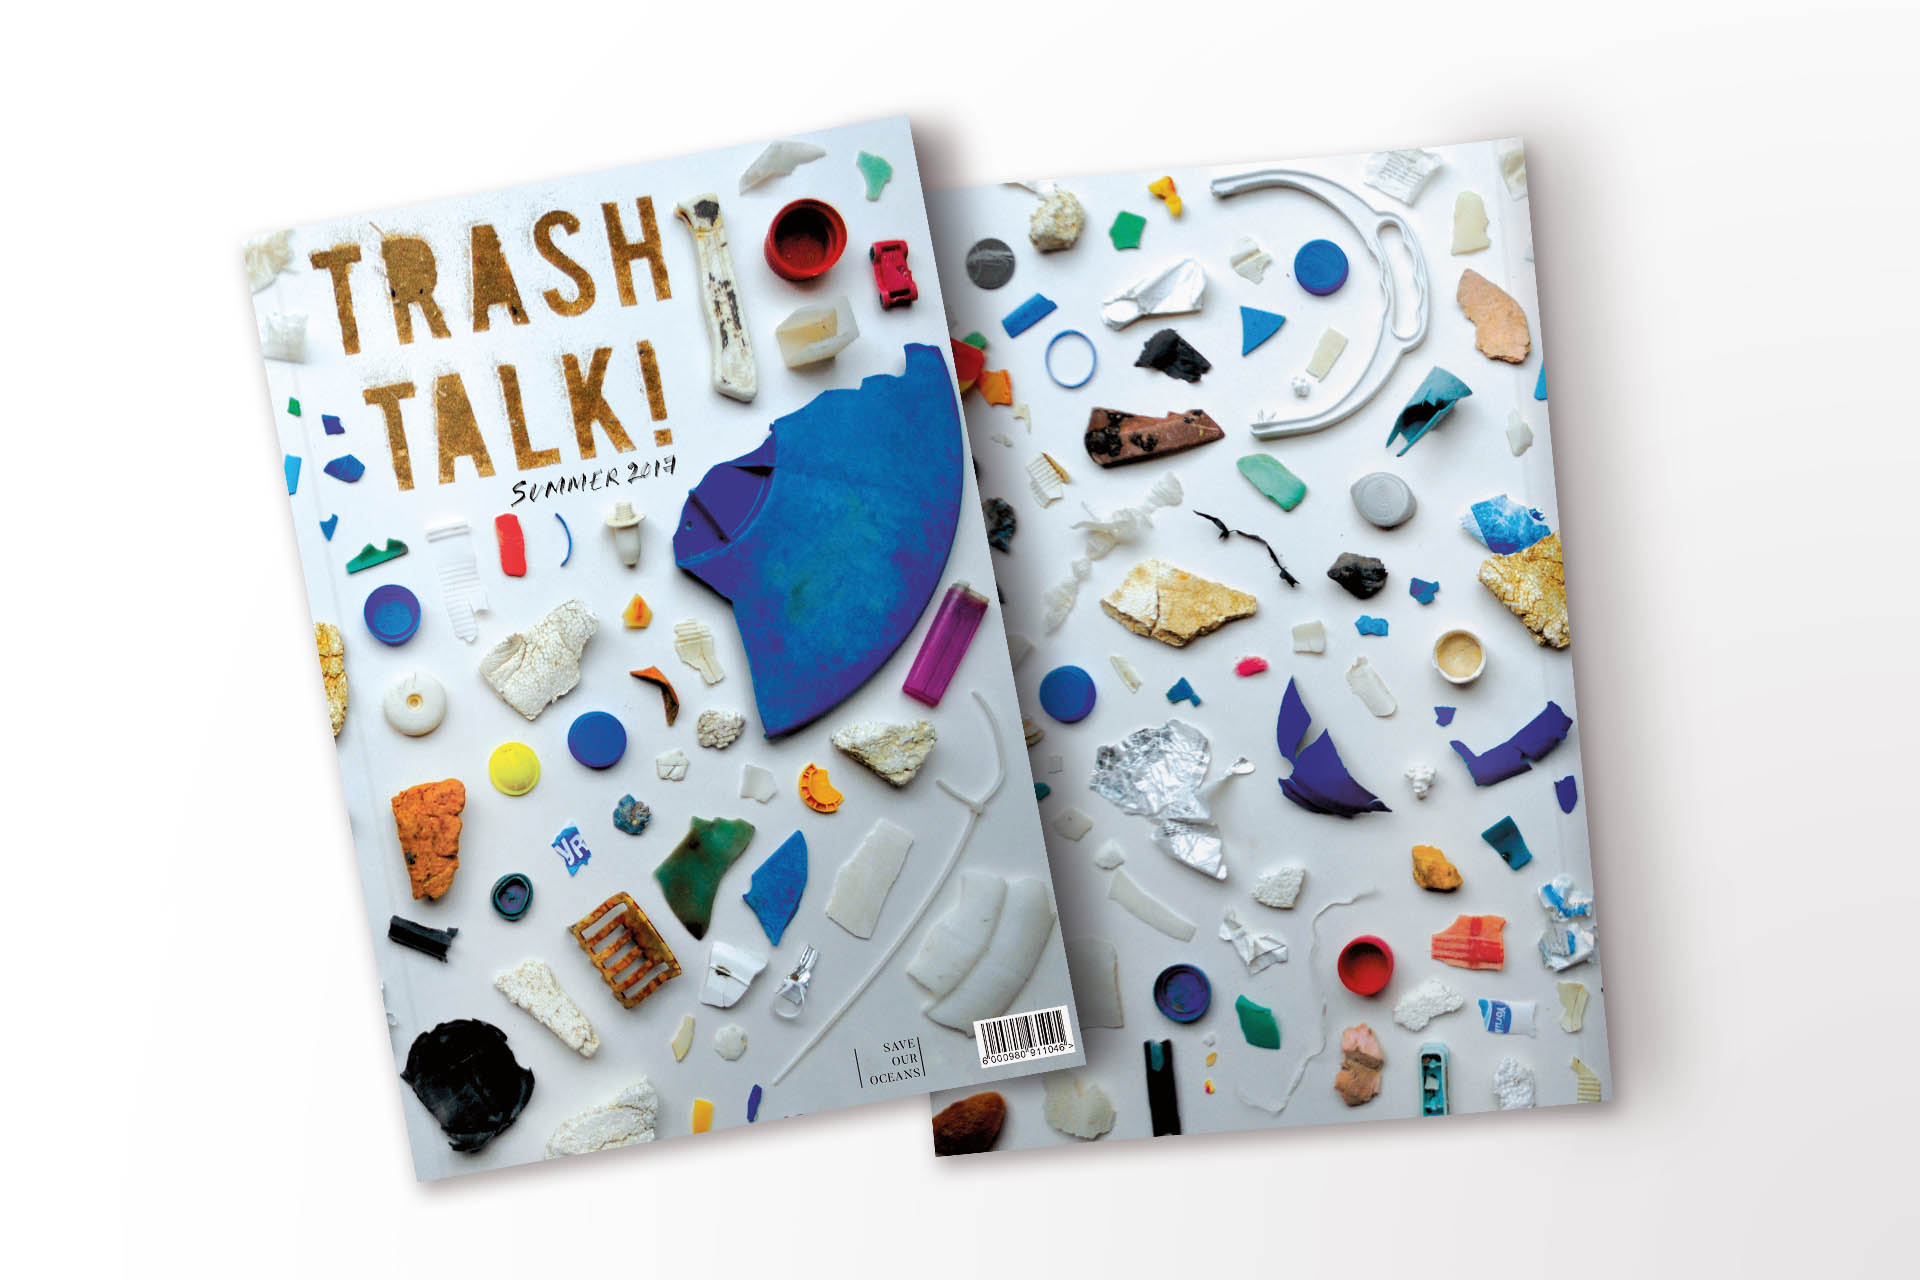 Trash Talk magazine cover design for Save Our Oceans